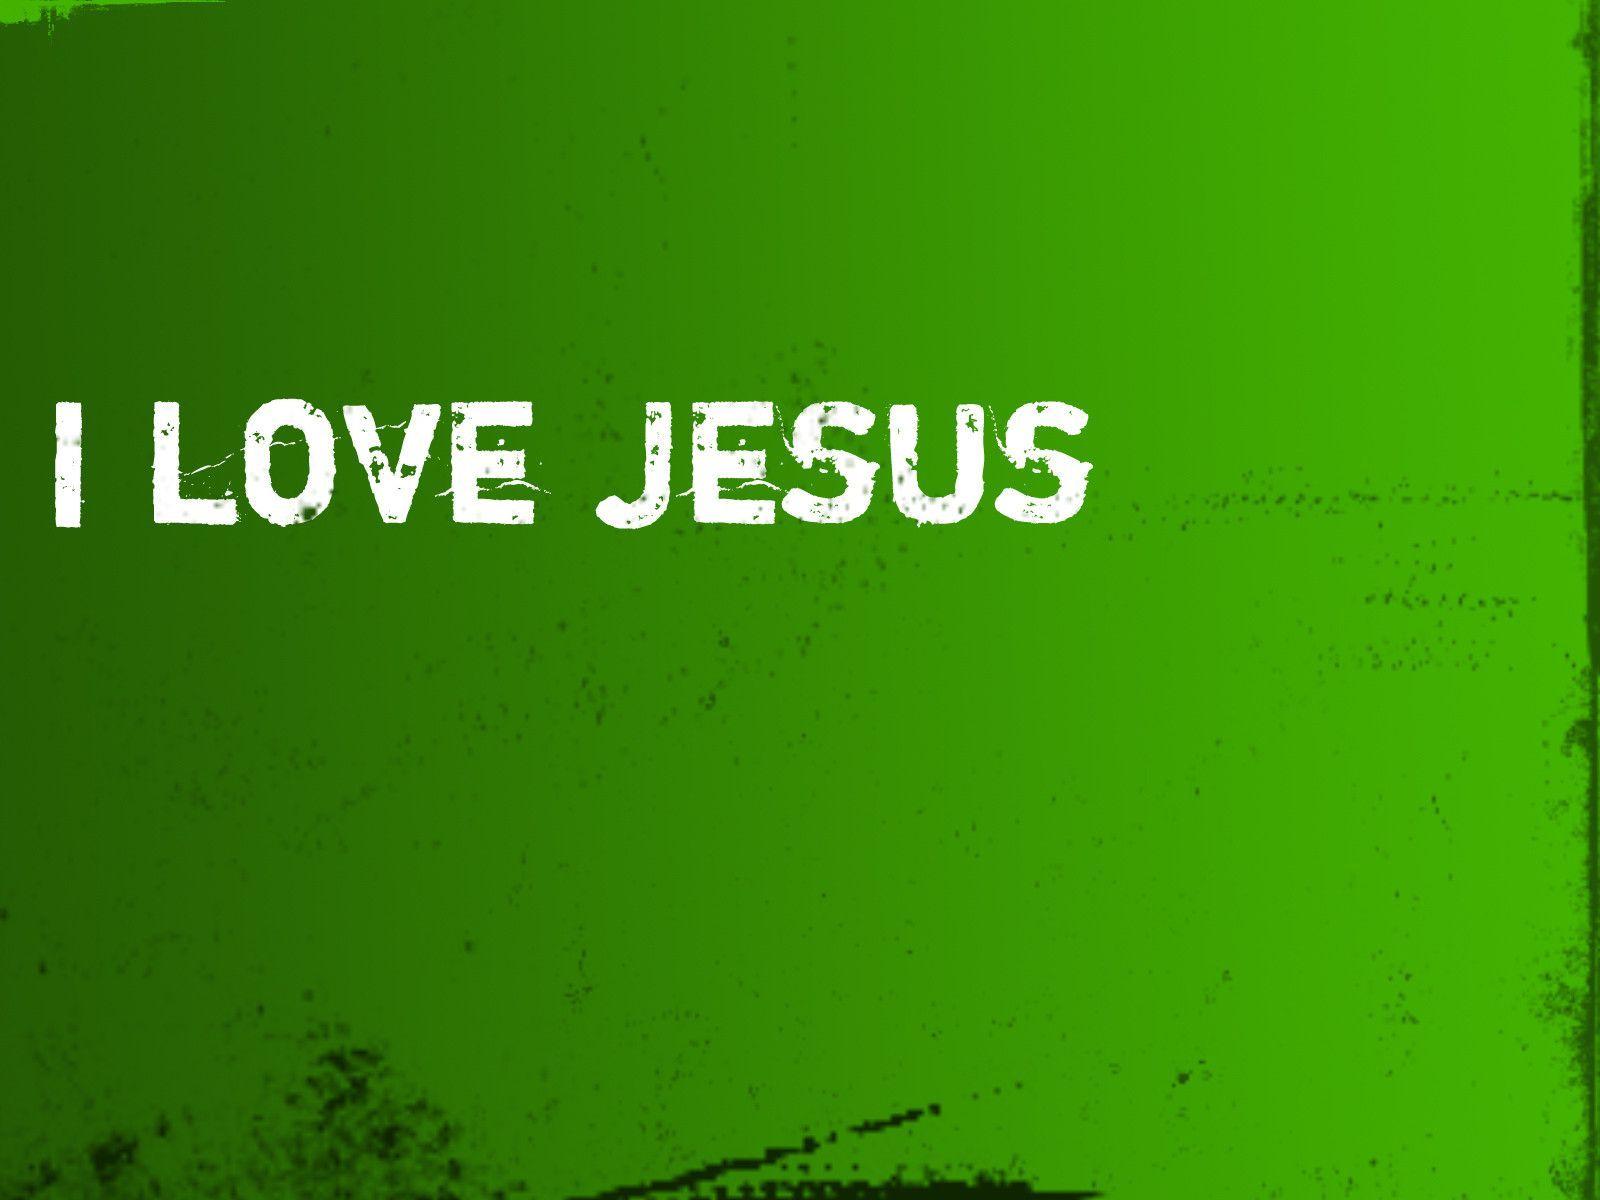 Download Free I love jesus green backgrounds